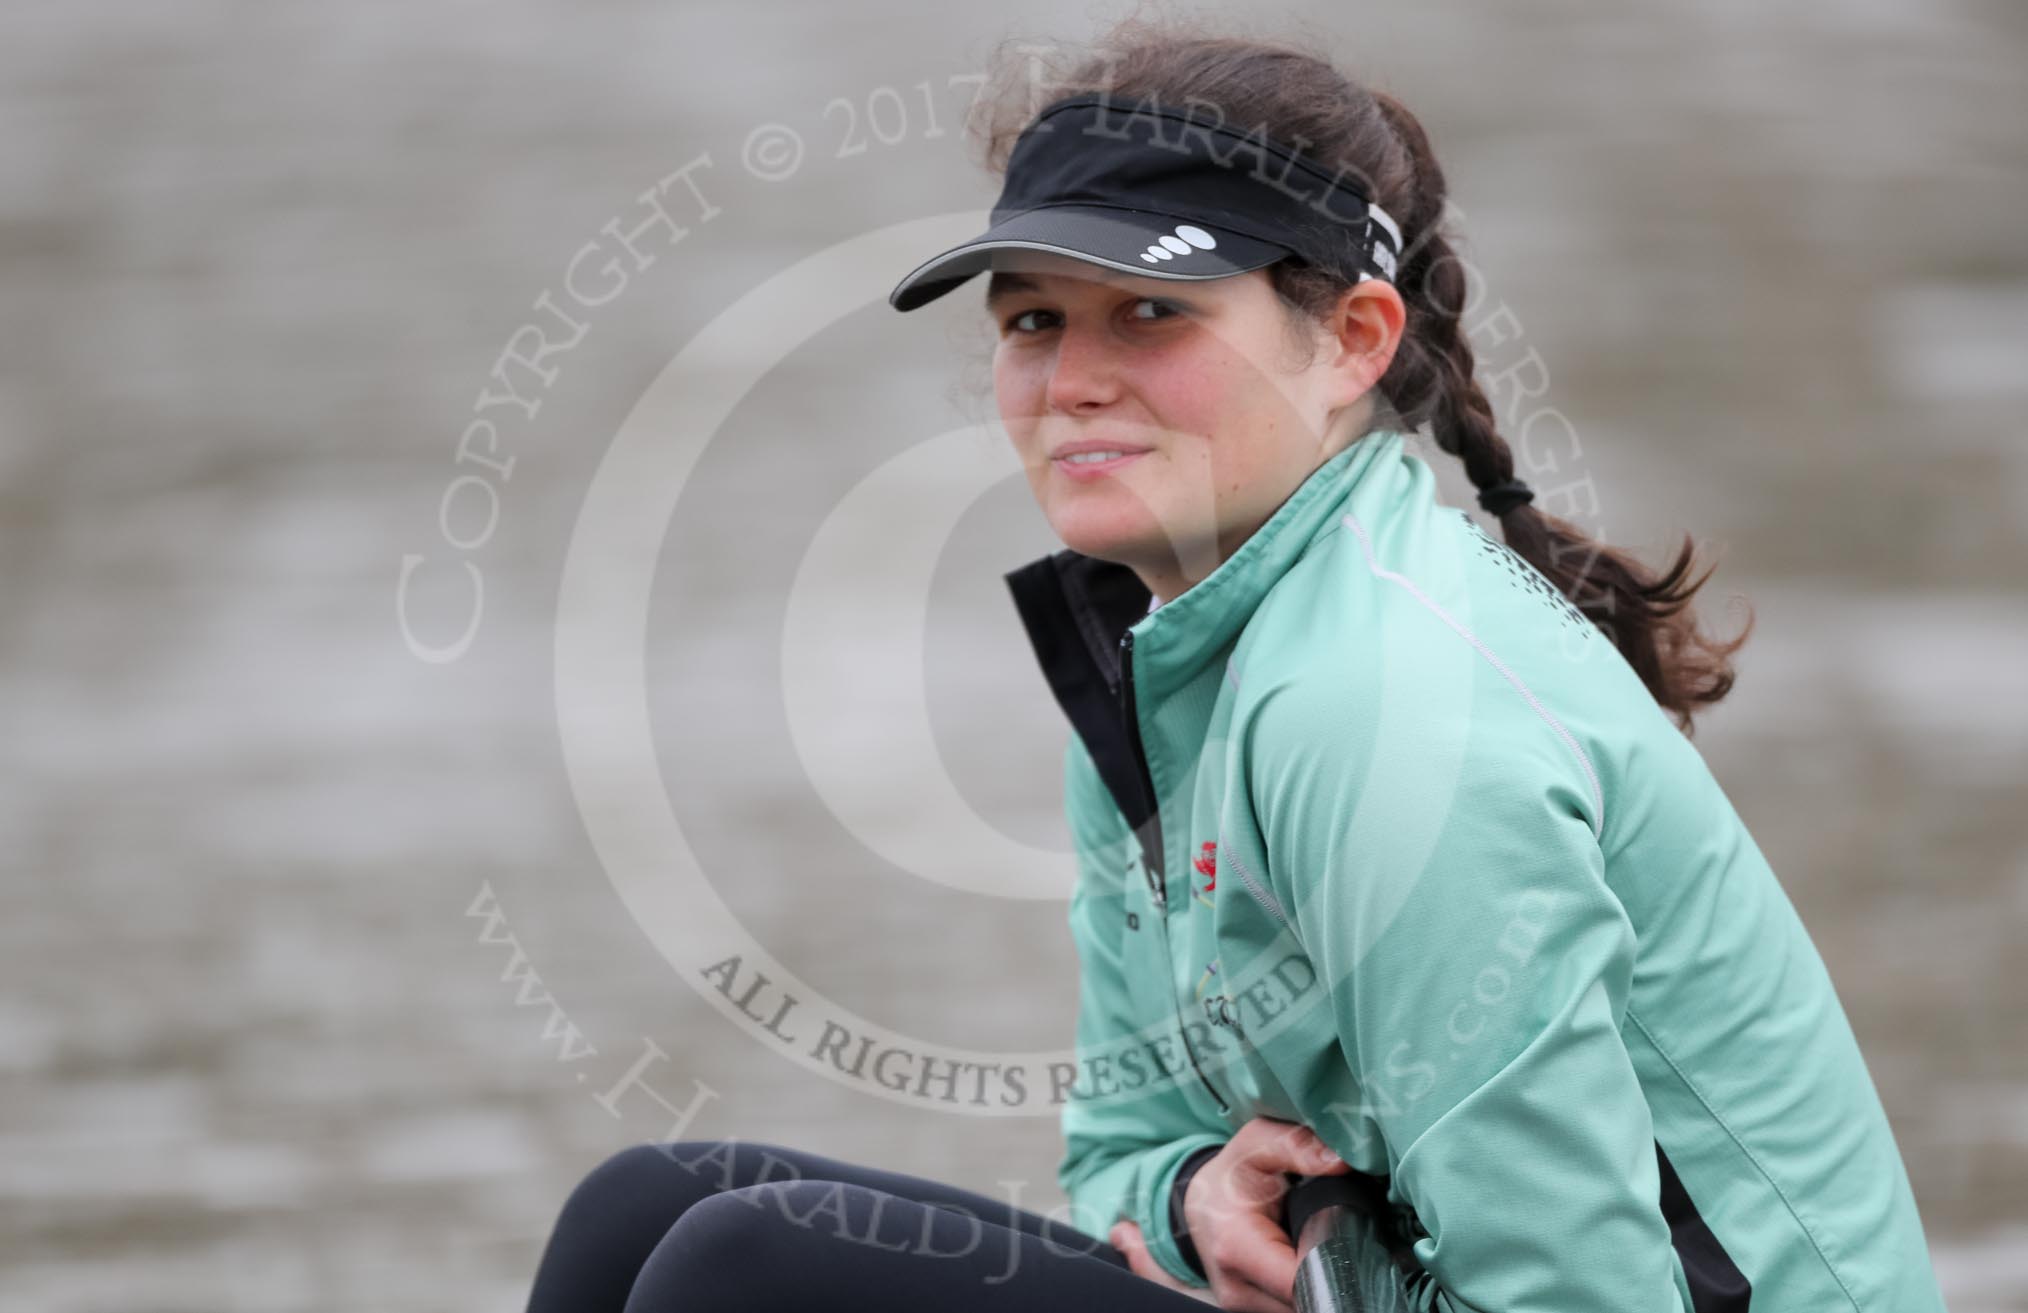 The Boat Race season 2018 - Women's Boat Race Trial Eights (CUWBC, Cambridge): Eve Caroe (bow) in Expecto Patronum.
River Thames between Putney Bridge and Mortlake,
London SW15,

United Kingdom,
on 05 December 2017 at 12:02, image #8